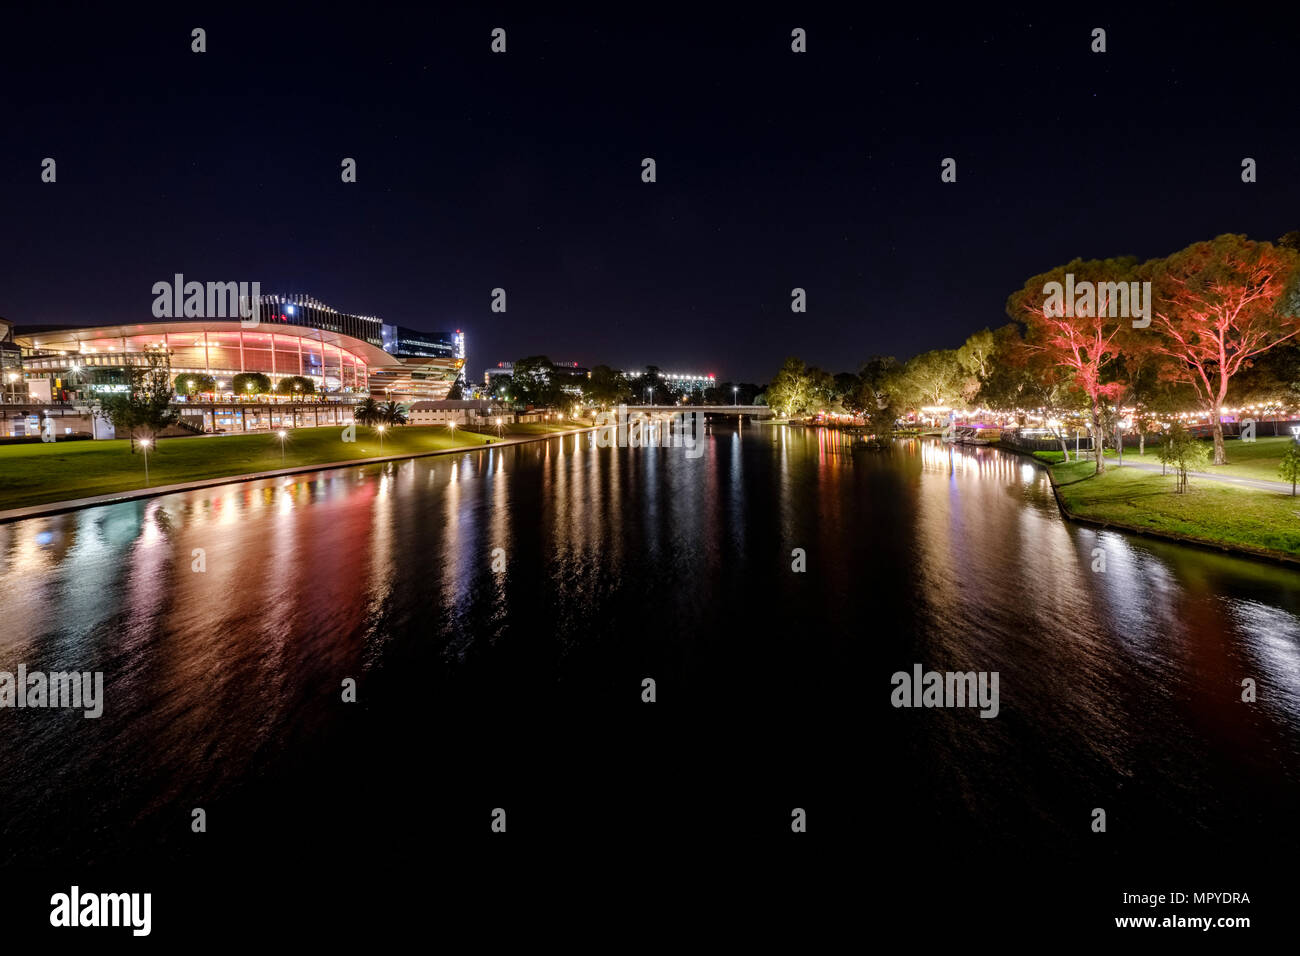 The Adelaide city skyline at night featuring the Torrens Riverbank precinct on the last night of the Adelaide fringe 2018 Stock Photo